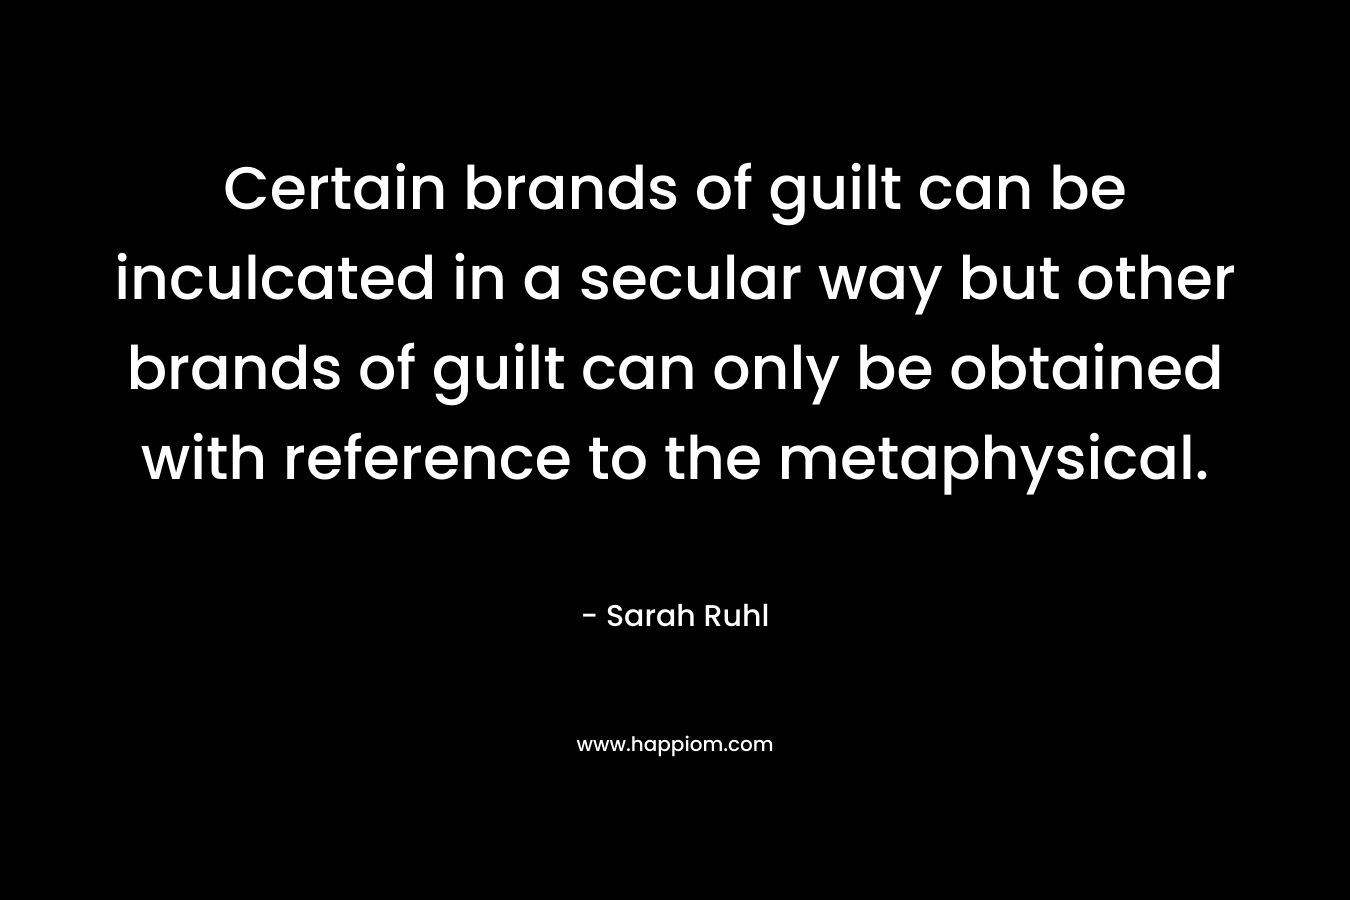 Certain brands of guilt can be inculcated in a secular way but other brands of guilt can only be obtained with reference to the metaphysical. – Sarah Ruhl